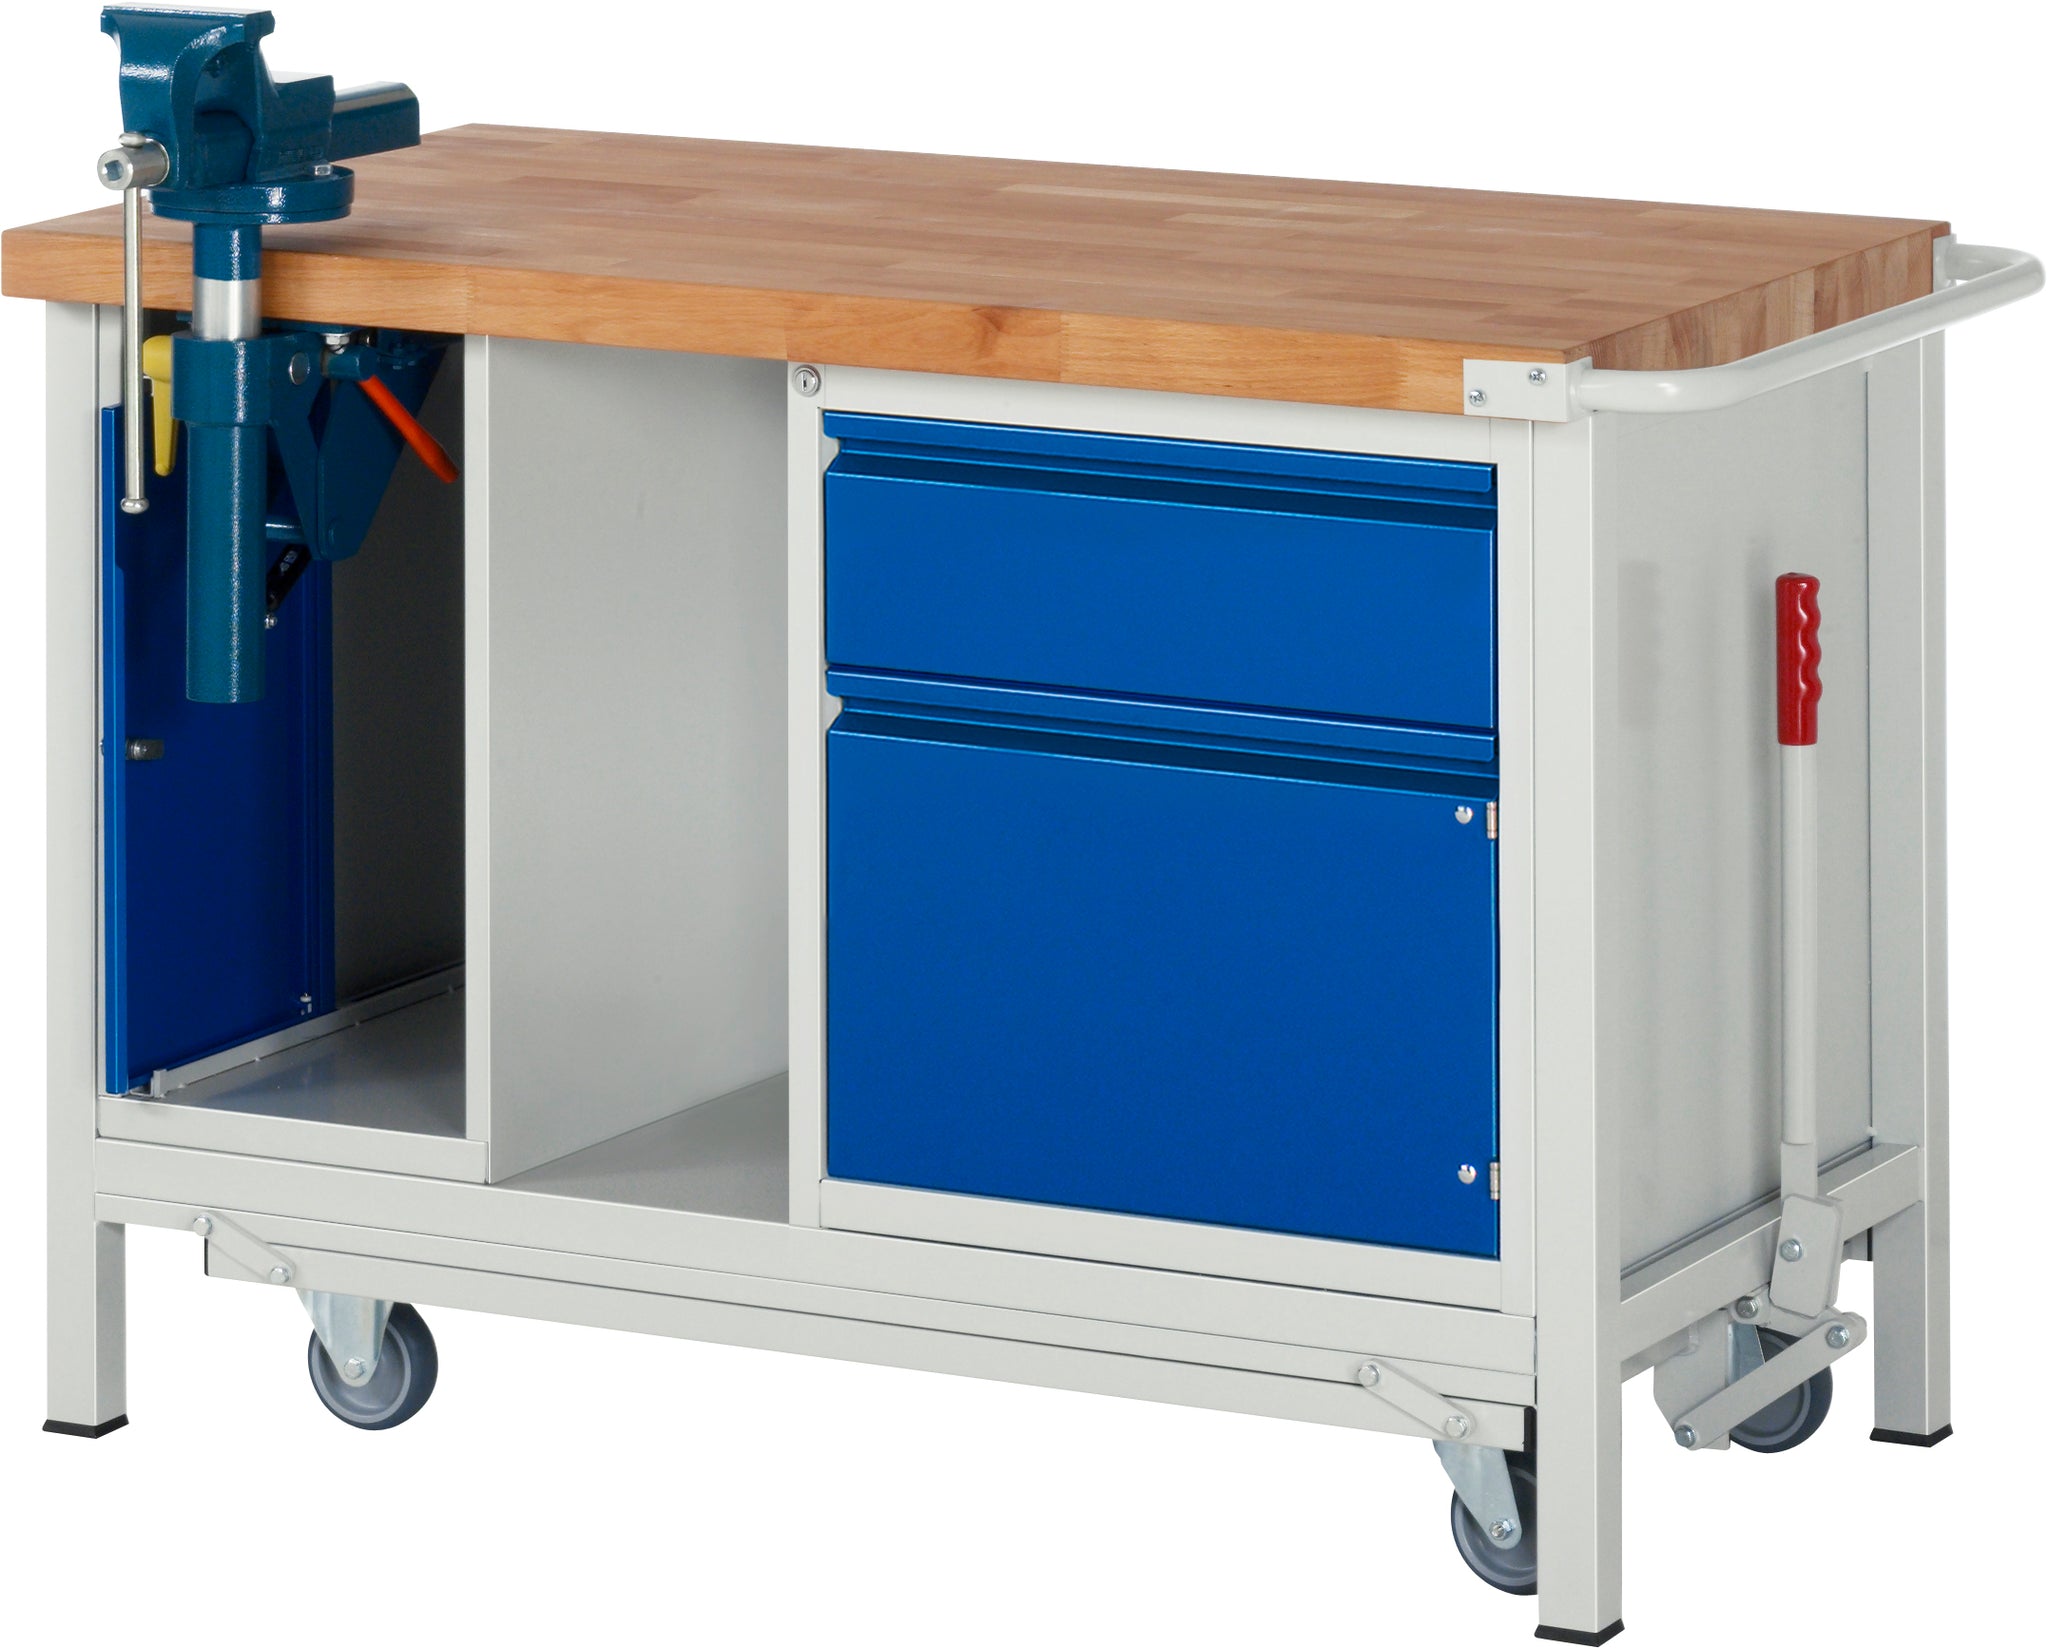 Mobile Industrial Workbench With Foldaway Vice Equiptowork